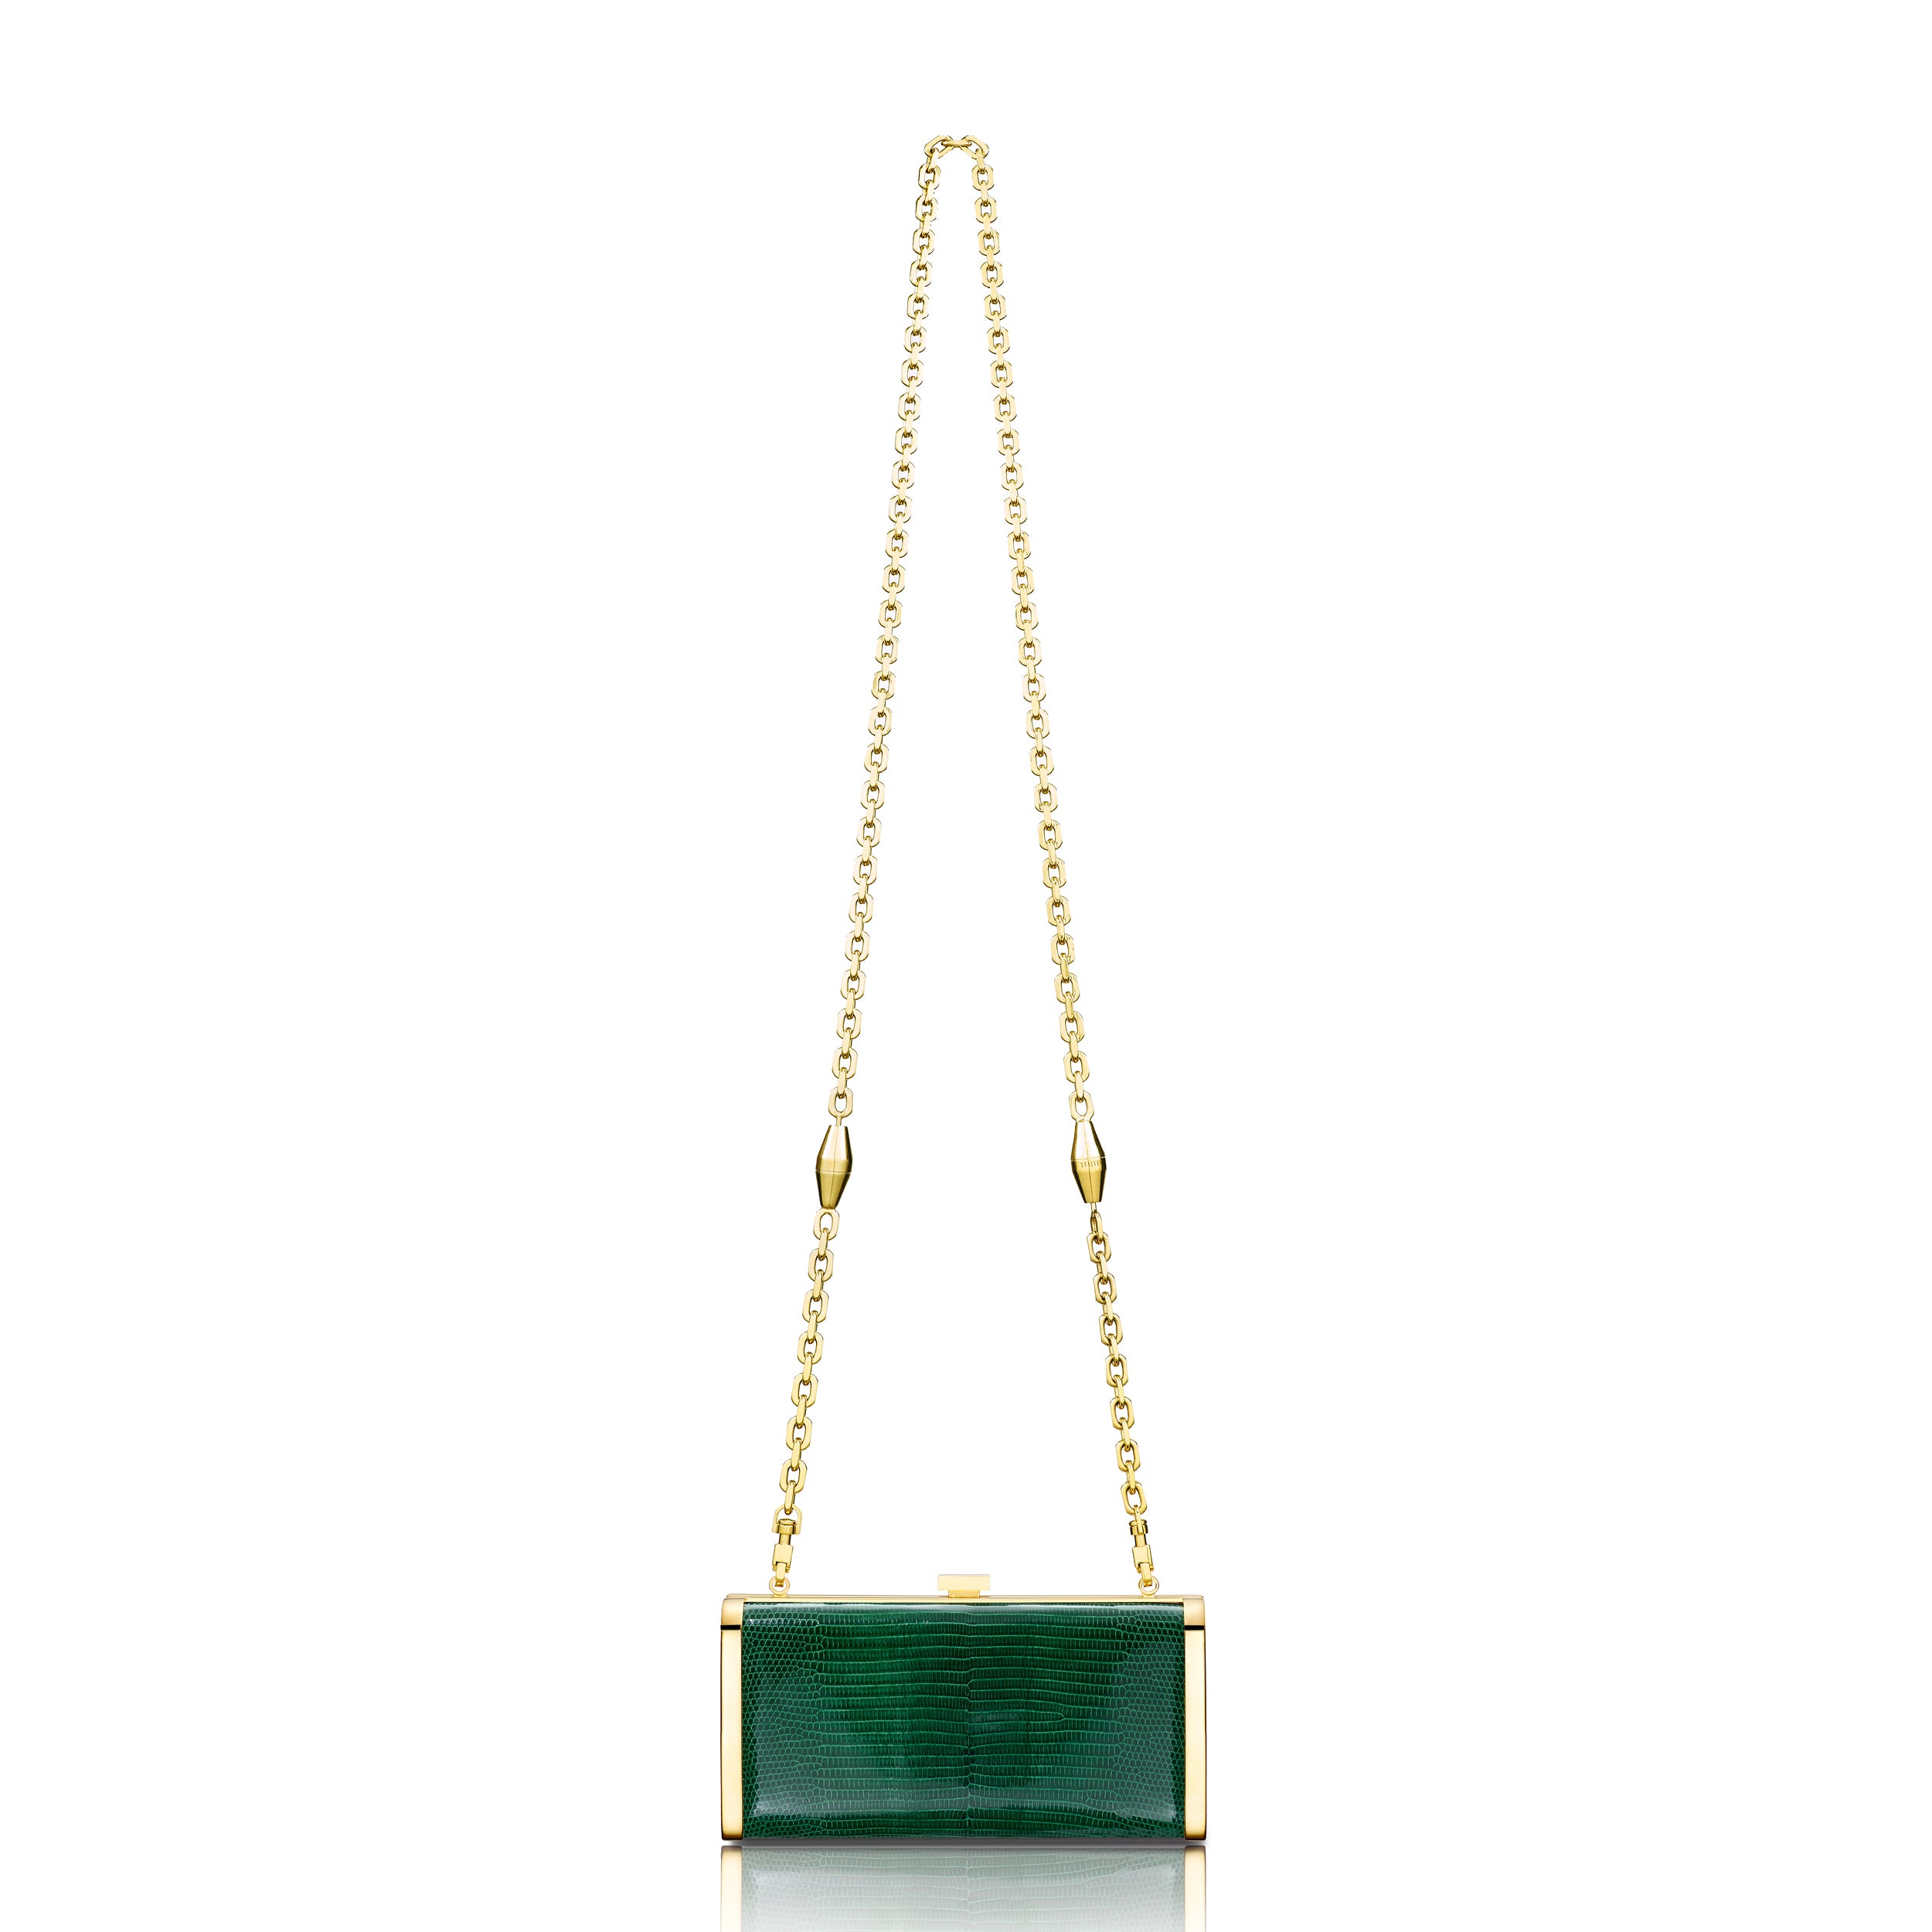 STALVEY Square Clutch in Emerald Lizard with 24kt Gold Hardware Back View with Chain